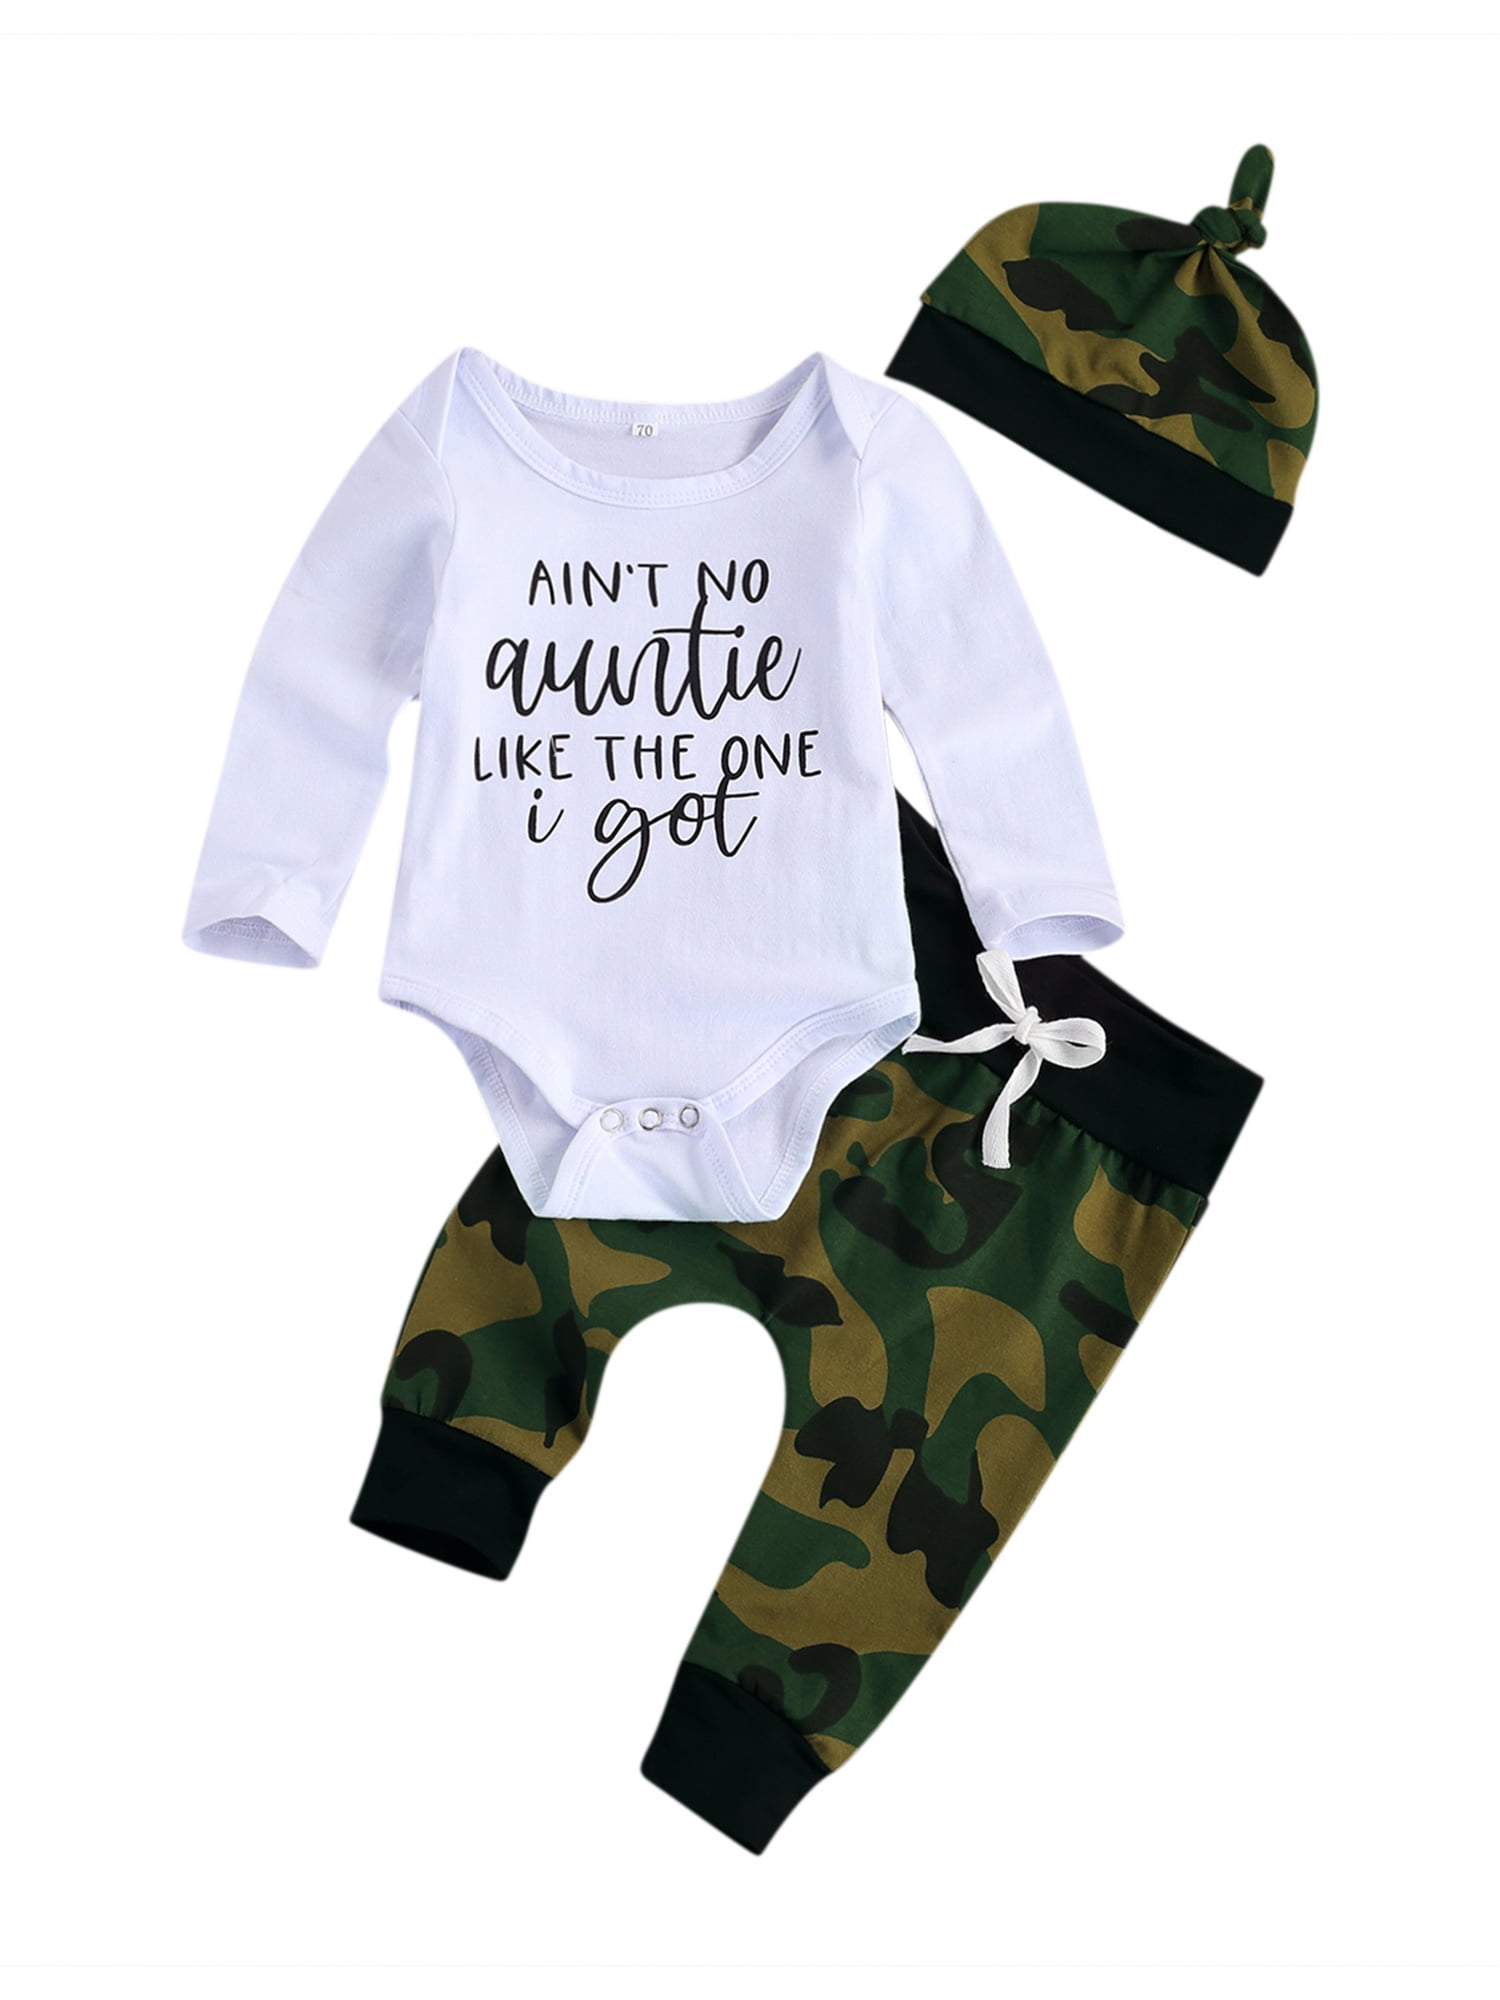 Unisex Baby Boys Girls Little Cutie Outfits Sets Letter Printed Romper Headband Long Sleeve Clothes Hat Pants 